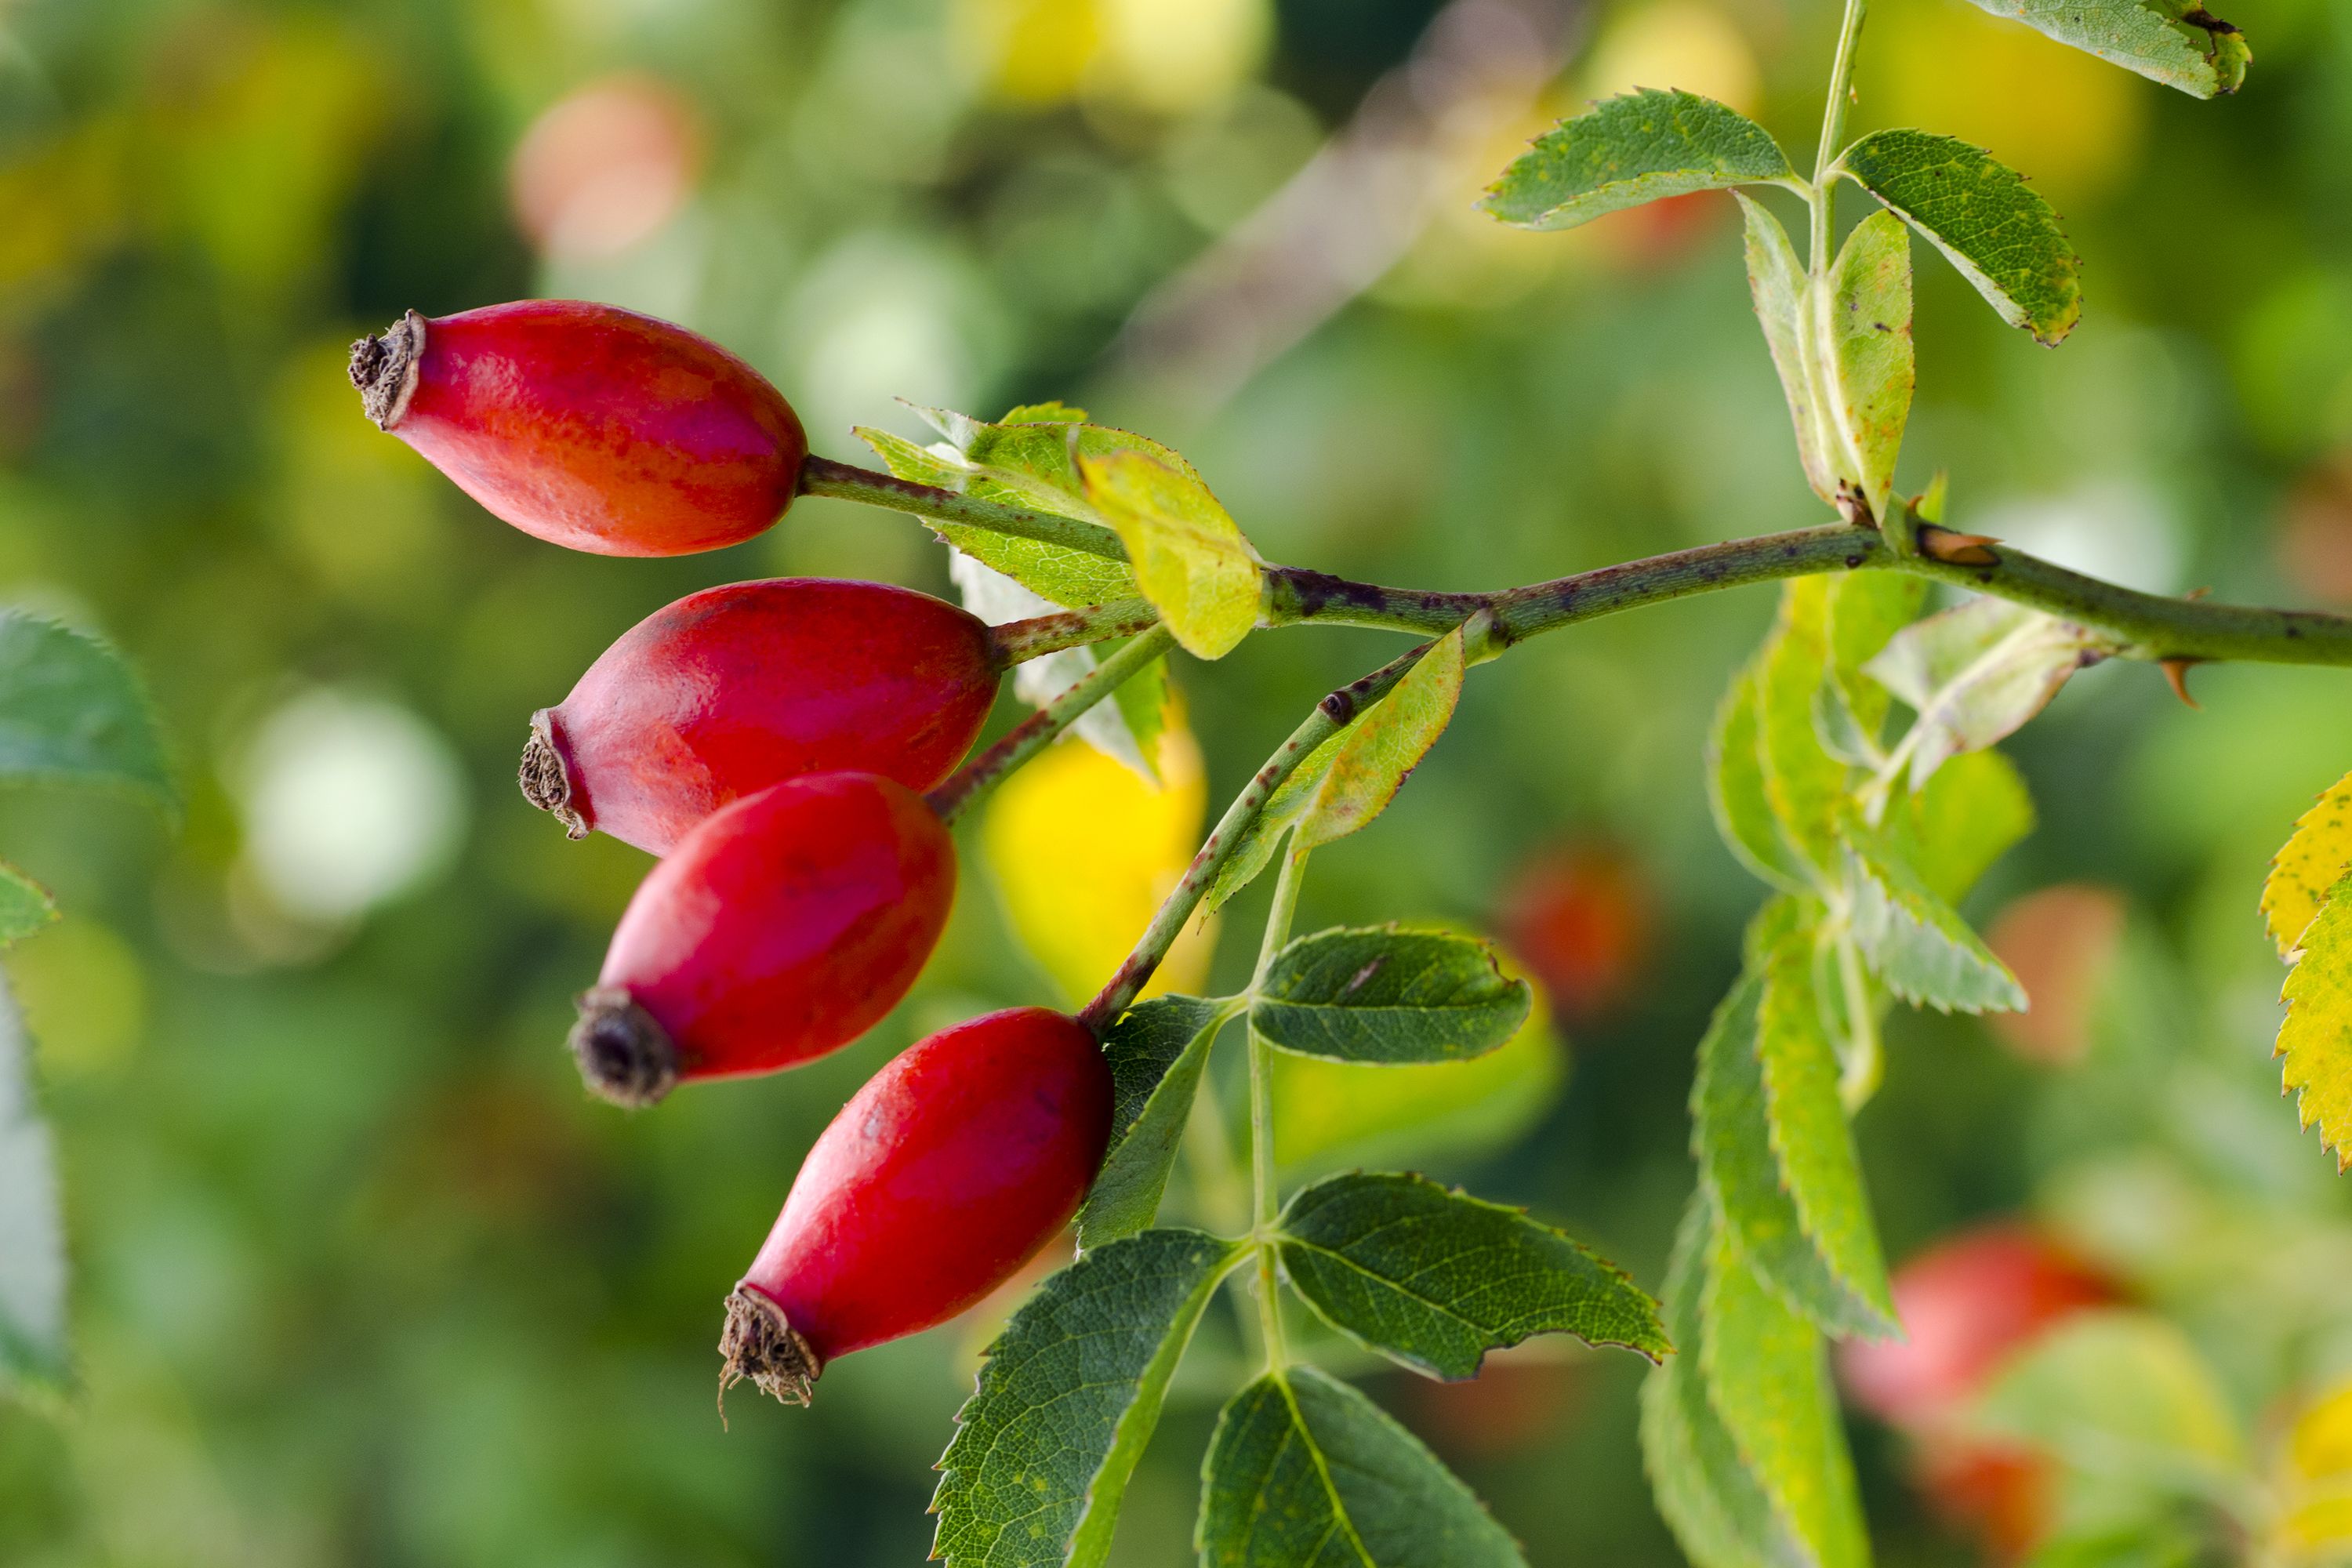 Hips are the fruits of rose plants. As the seeds mature, they swell and a layer called the pericarp forms around them. Hips are also often used in teas and jams, most commonly from the dog rose plant.